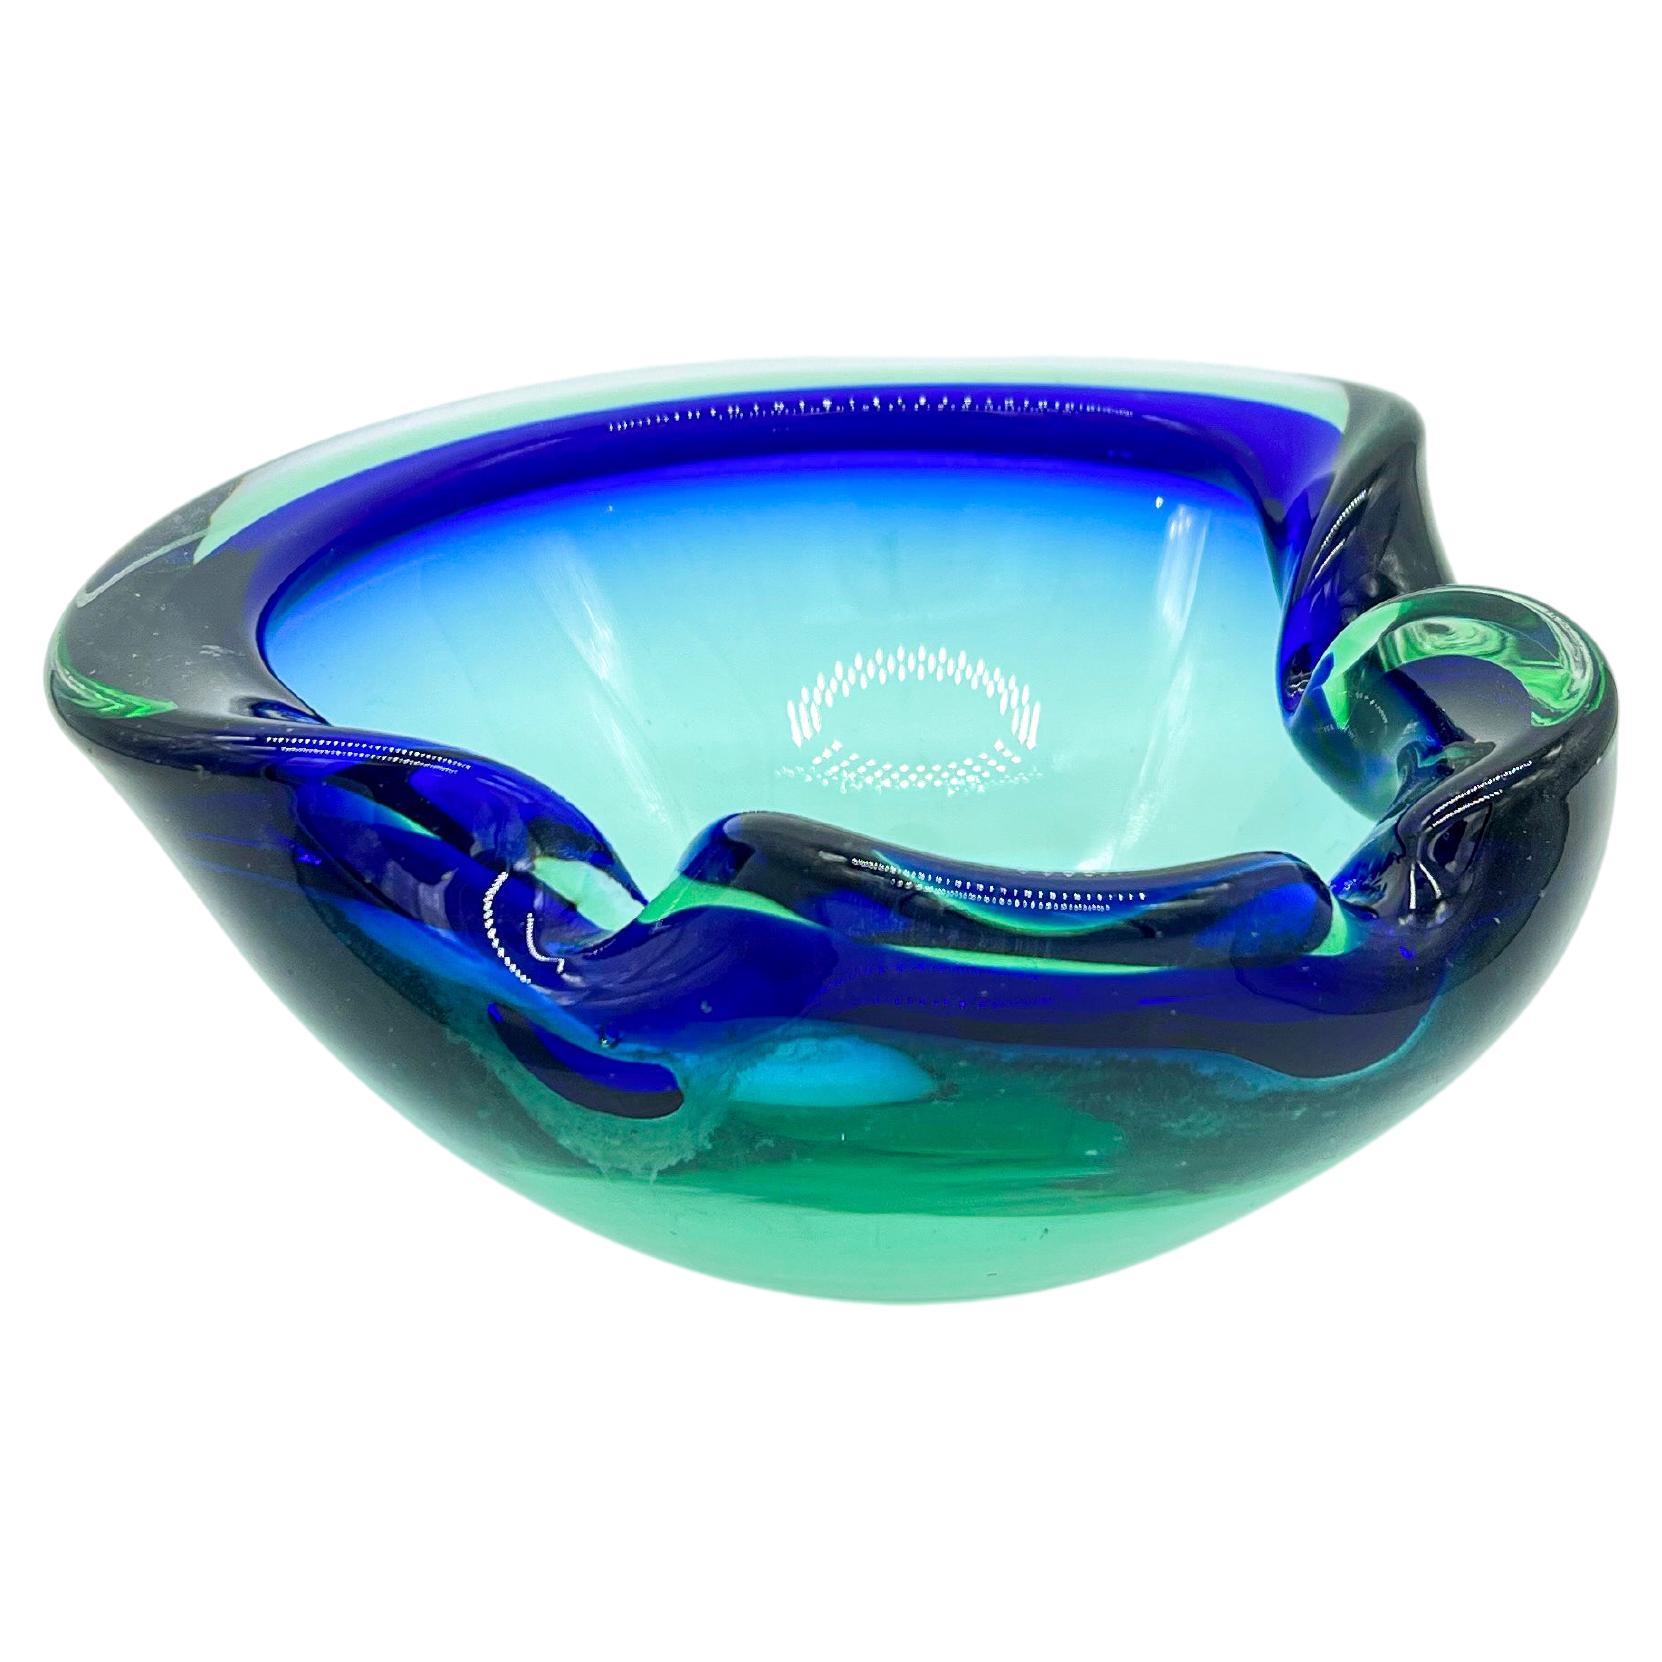 Vintage Big and Heavy Murano Bowl in Deep Blue and Mint Green "Sommerso" Glass For Sale